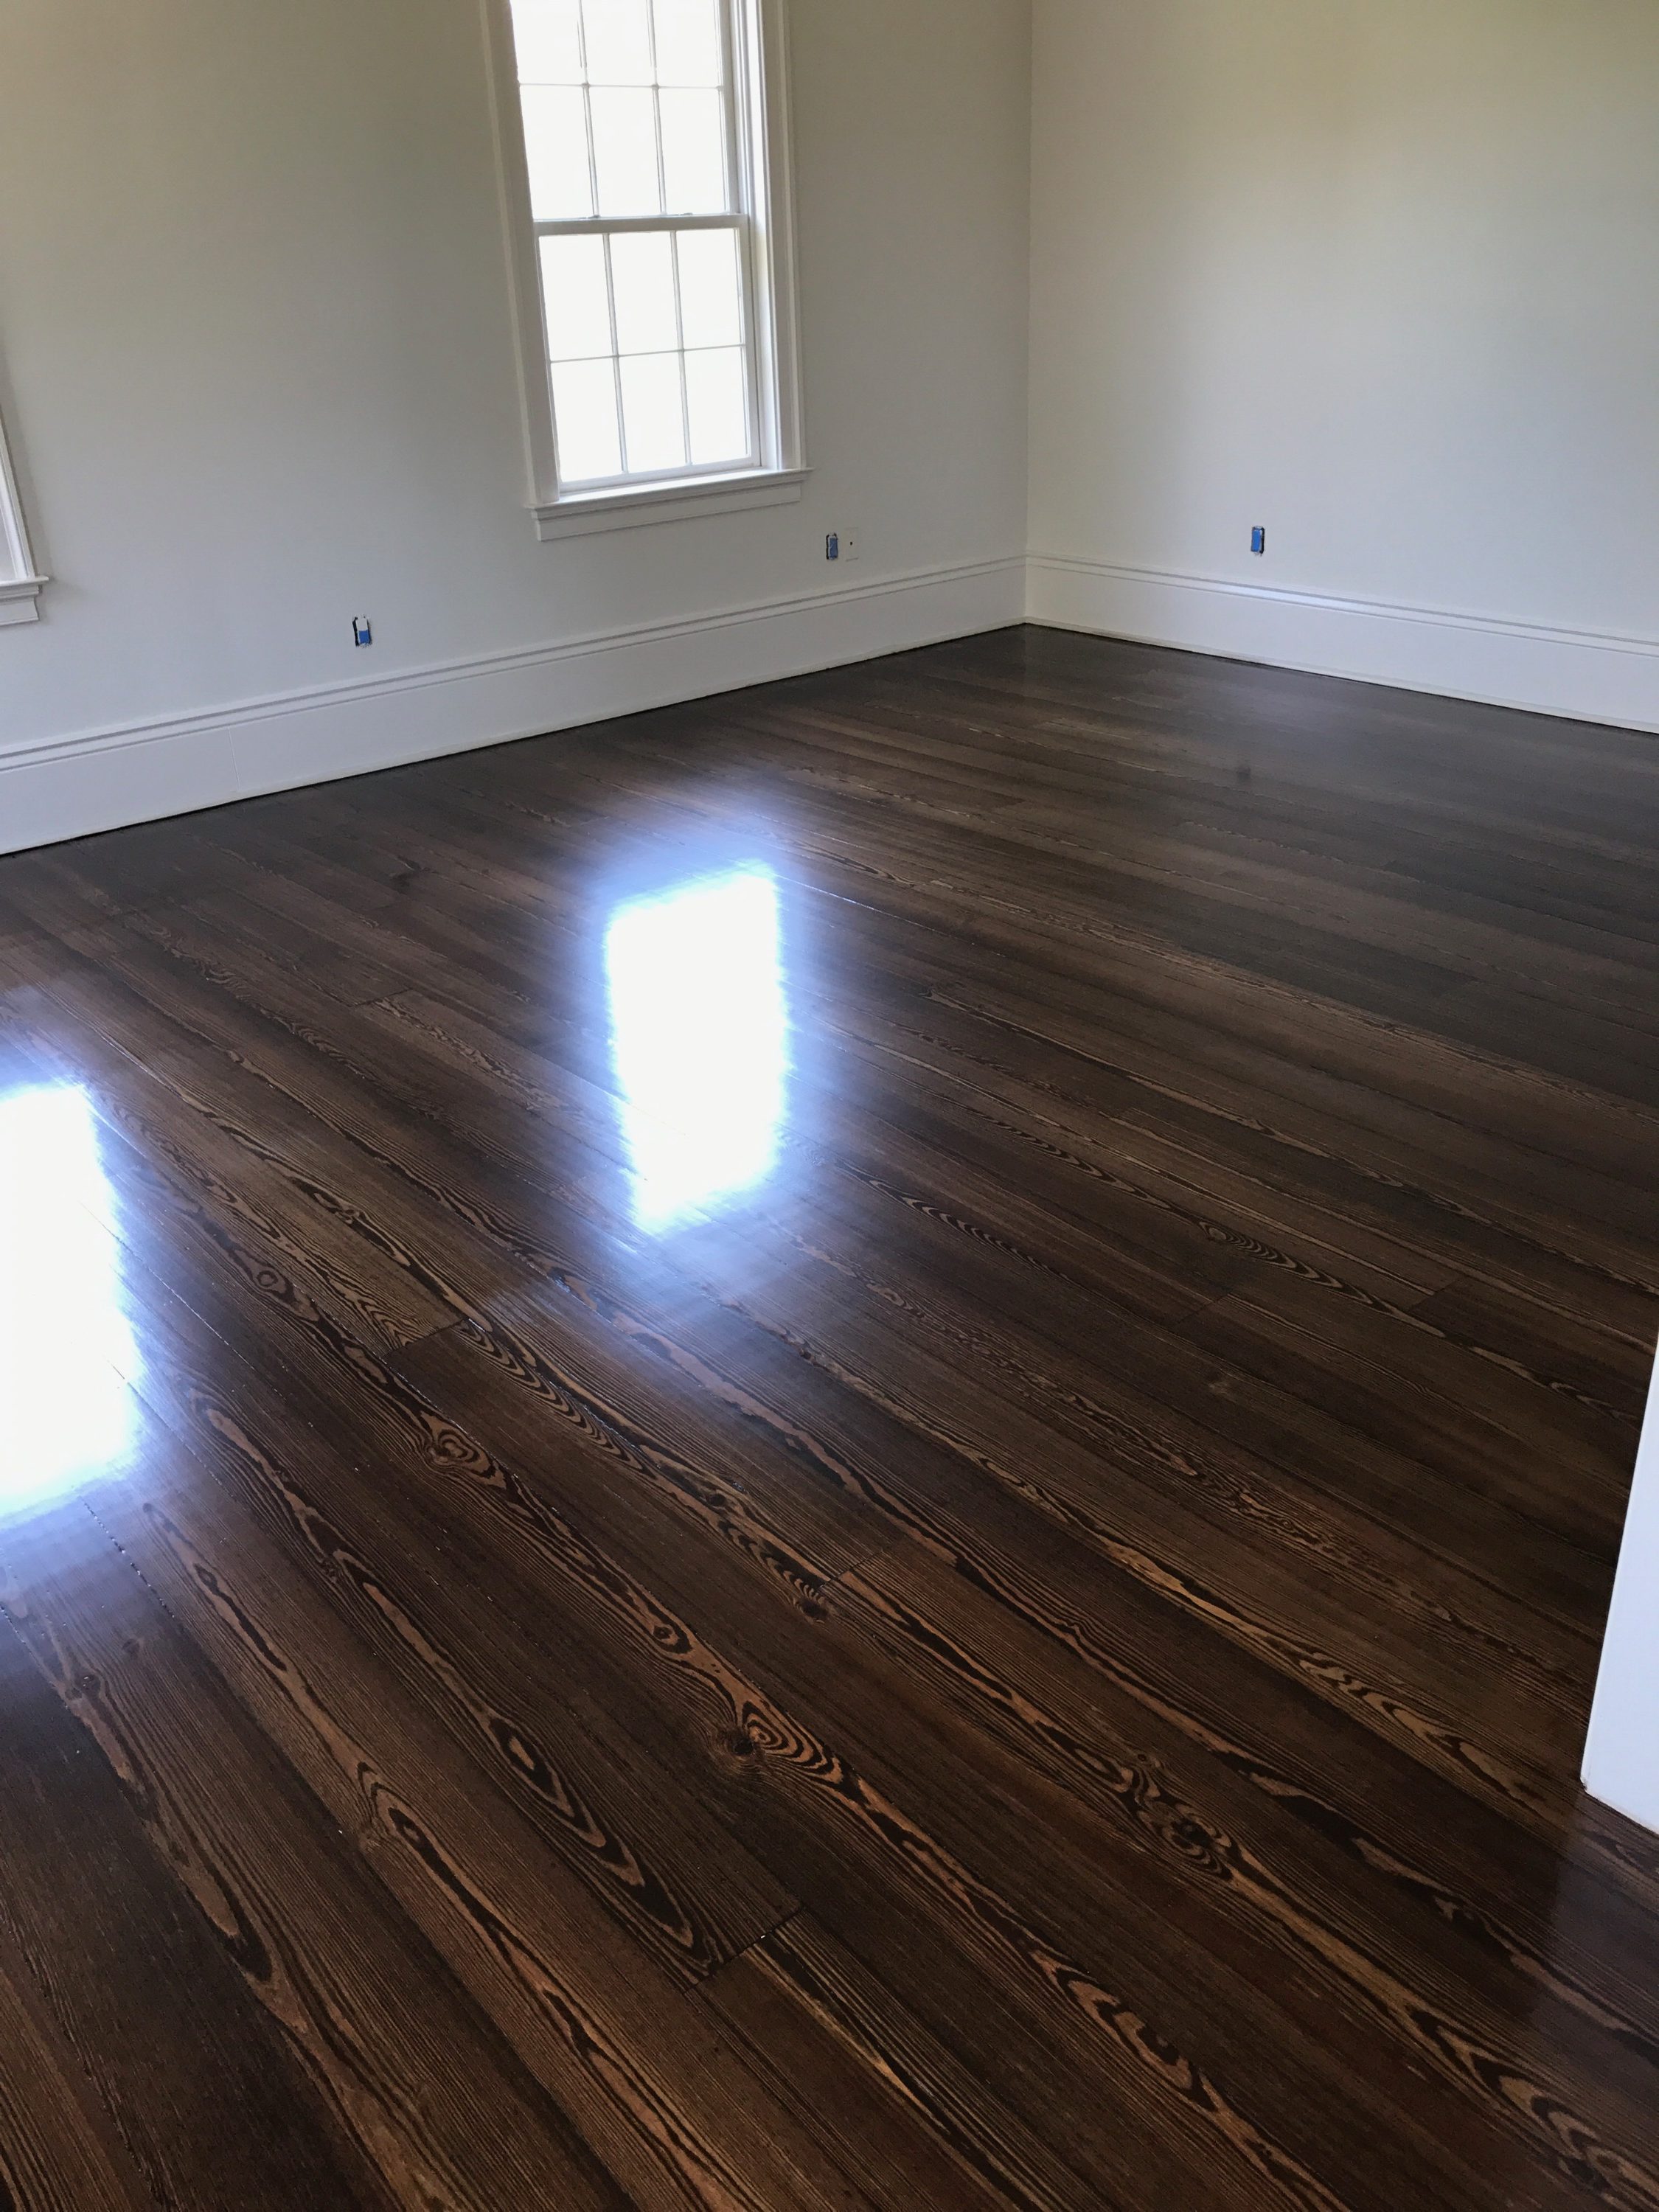 Pictured is a room with dark stained red pine hardwood flooring. The floors are glossy with the contrasting grain visible.